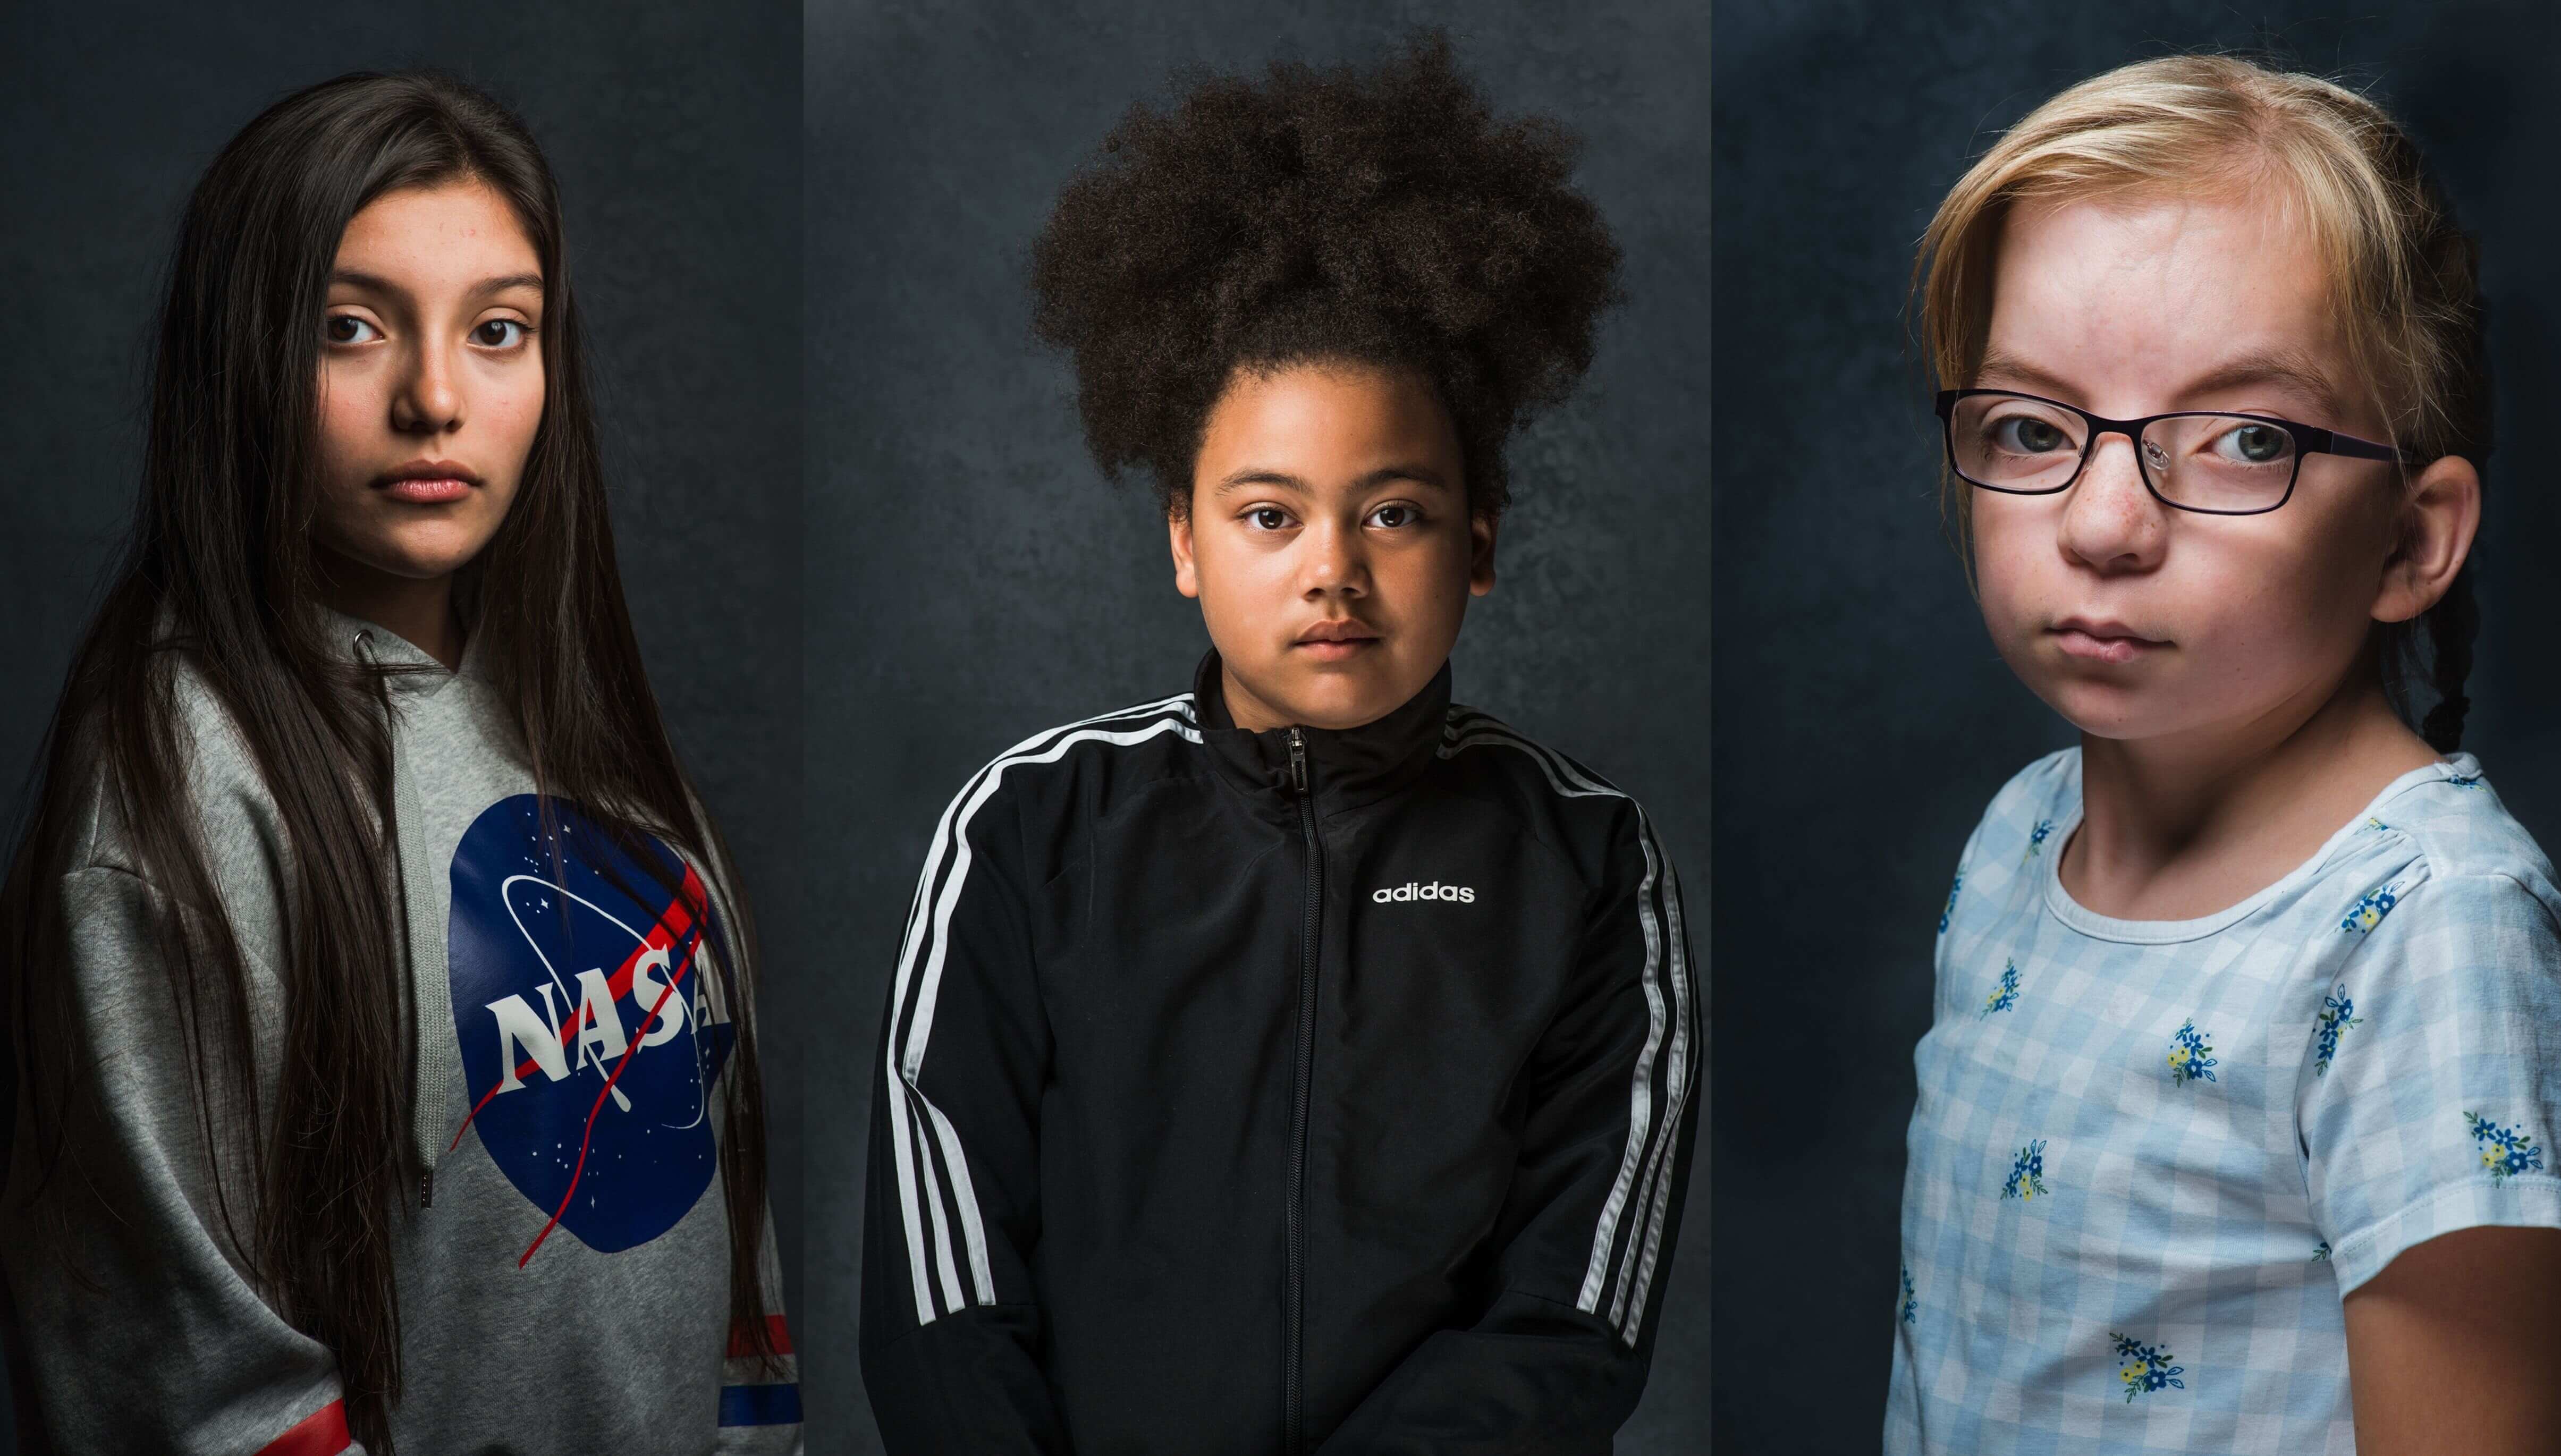 Three portrait pictures of three girls from Bradford, each standing against a black background – as part of the Impression Gallery’s current exhibition, Being Inbetween by Carolyn Mendelsohn. 